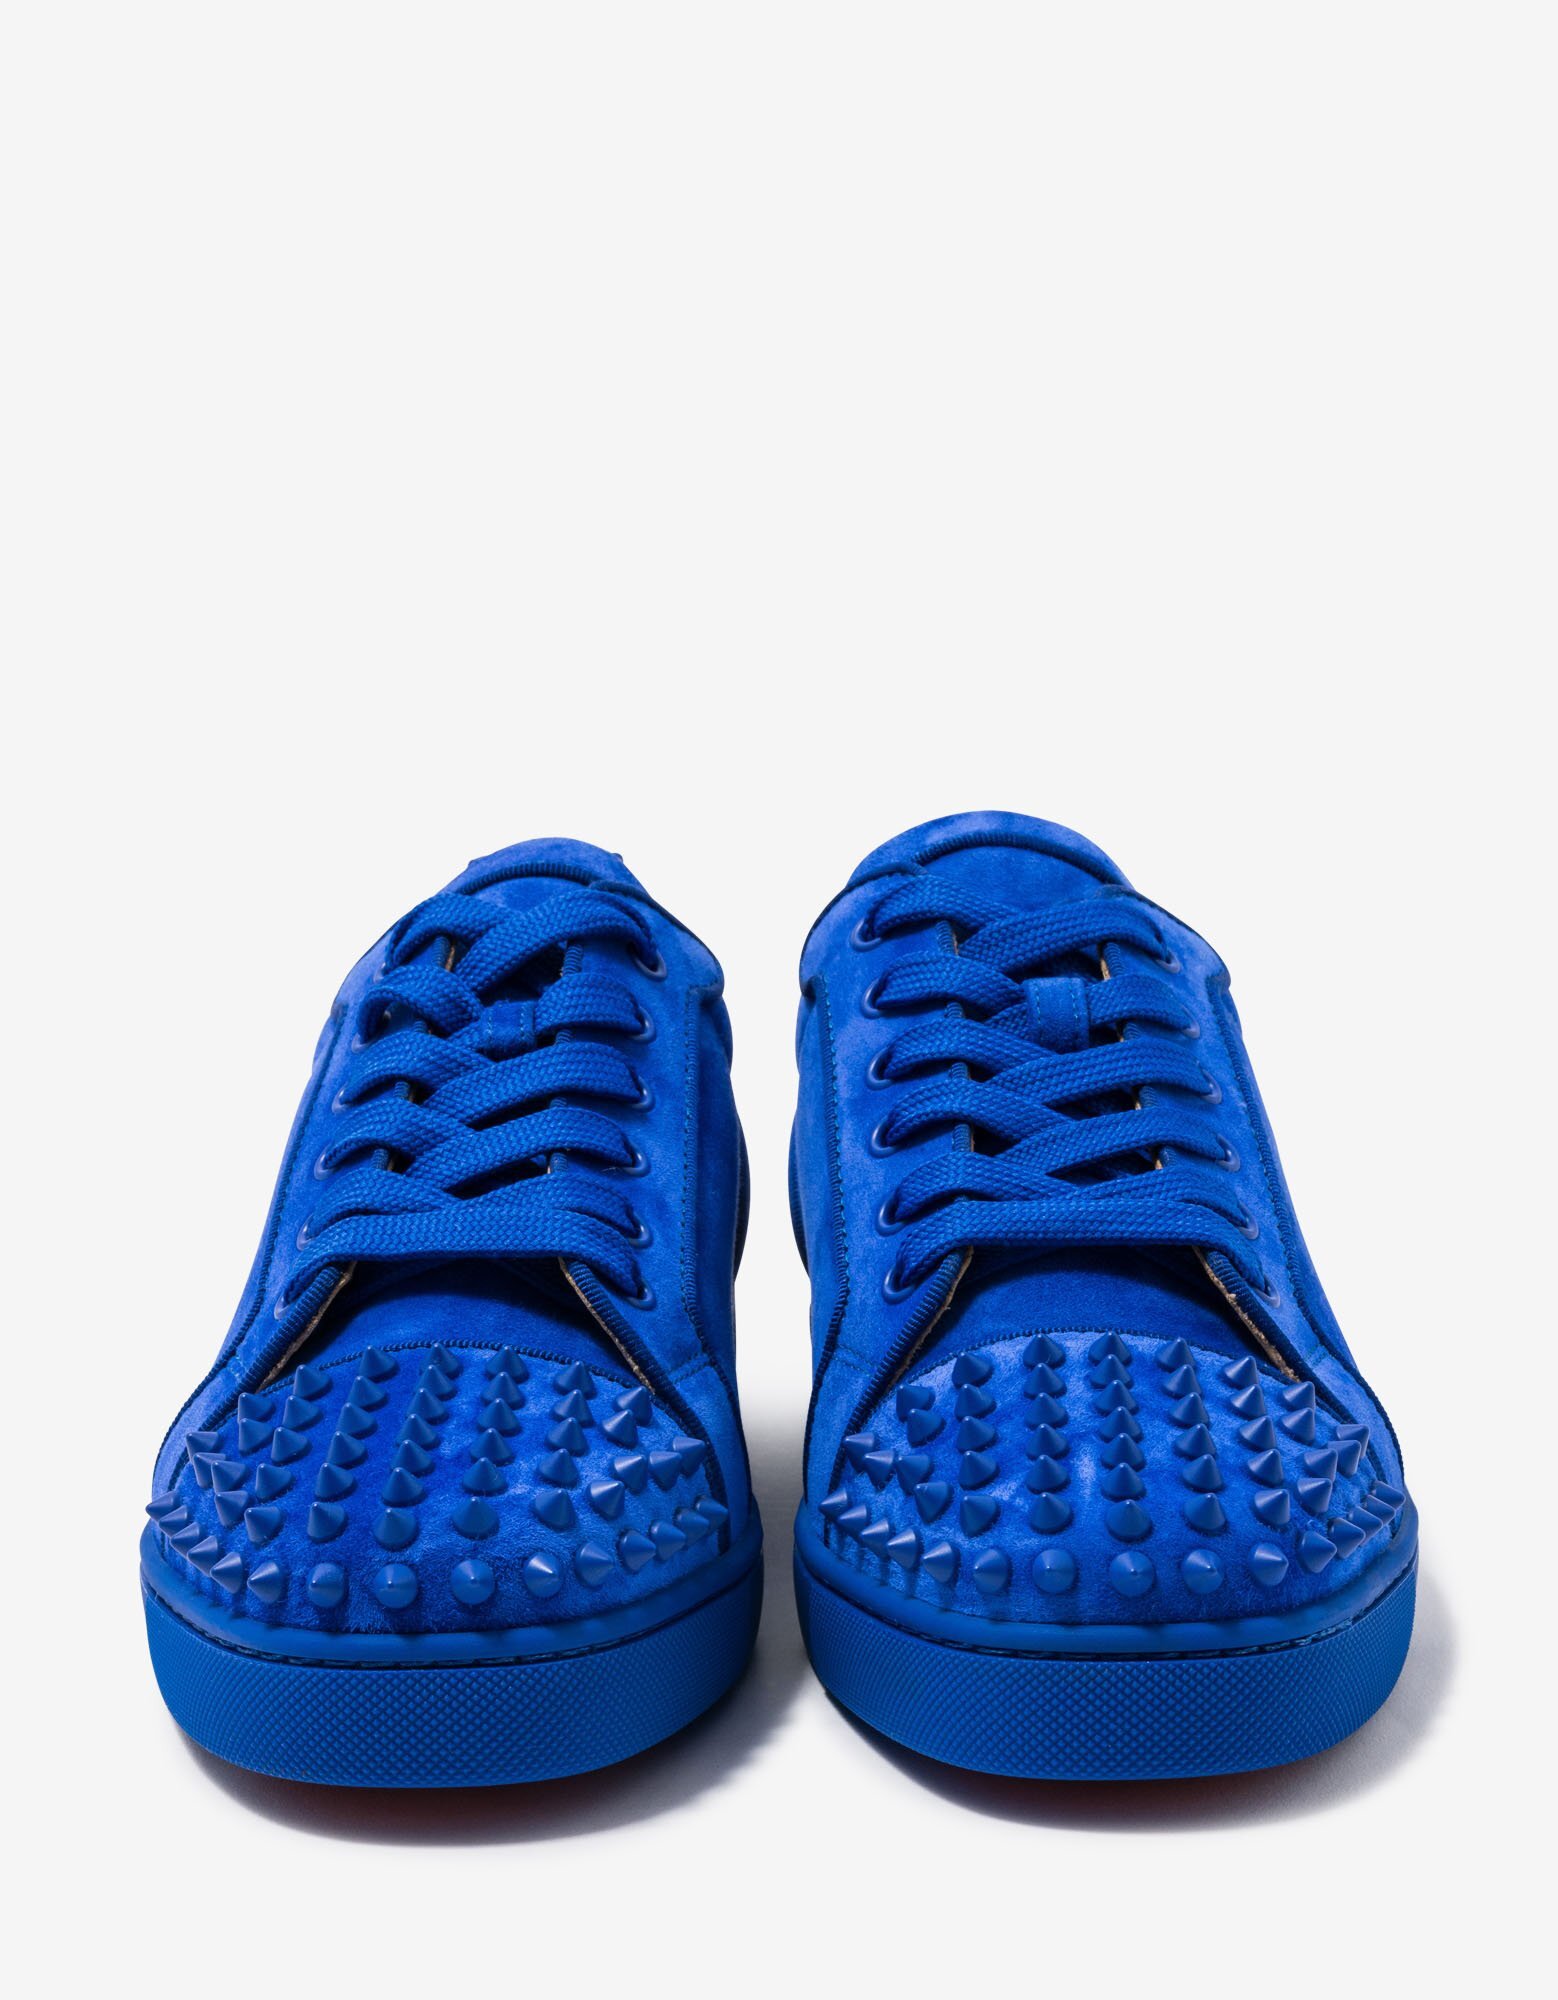 Christian Louboutin<br/><br/>Louis Junior Spikes Orlato Blue Suede Trainers  — Impressions Lyfe